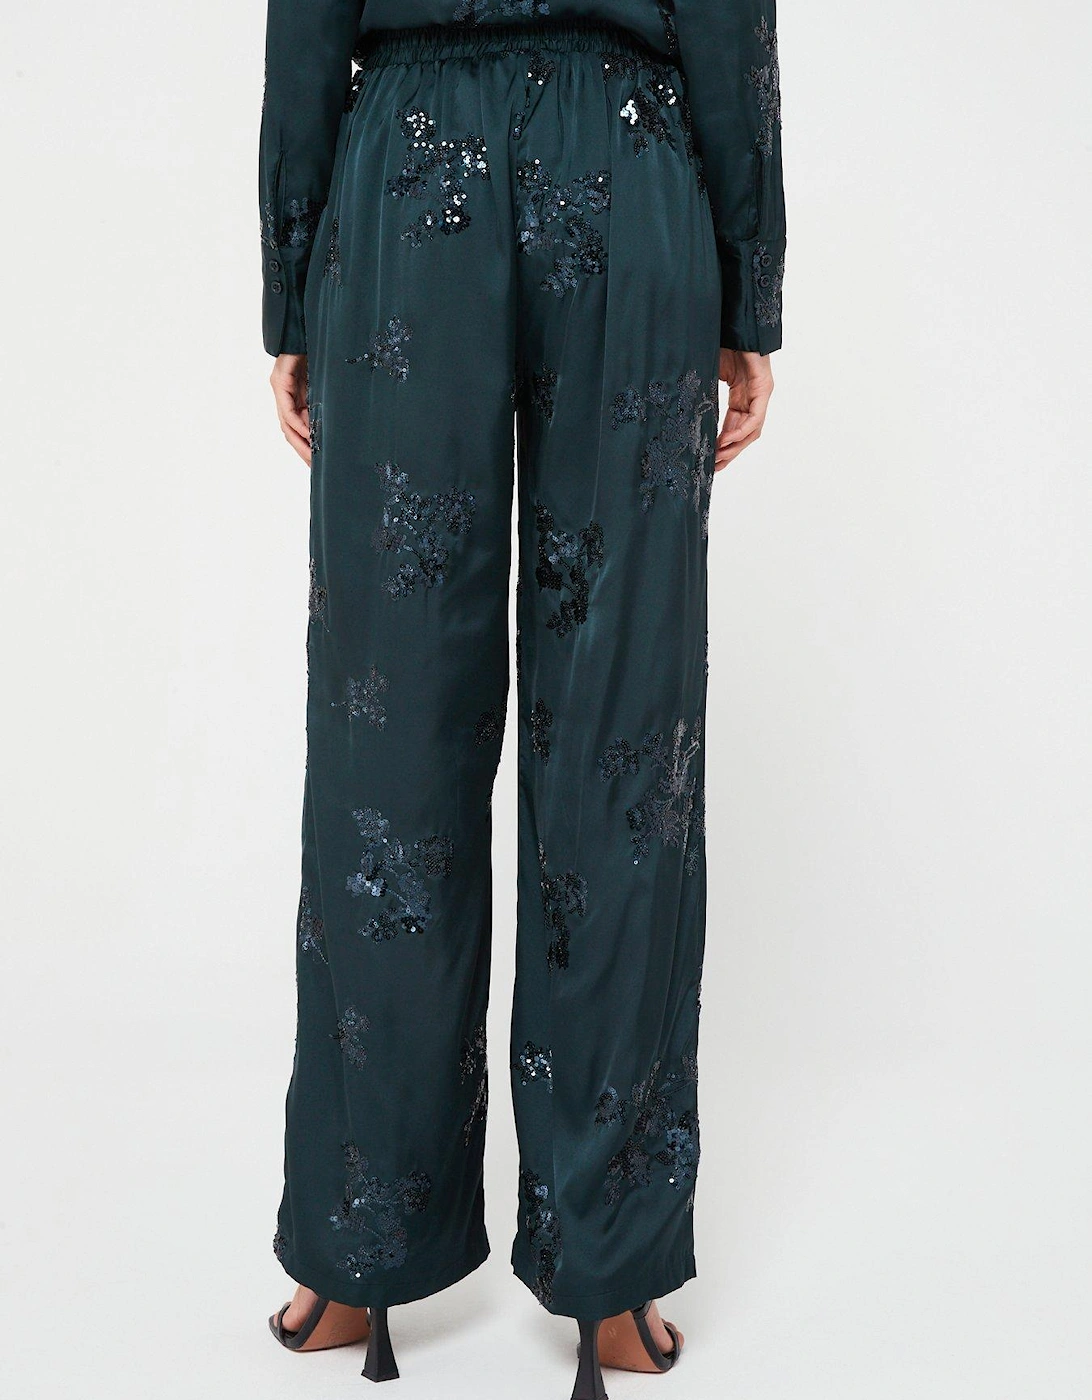 Satin Sequin Co-ord Trousers - Dark Green 